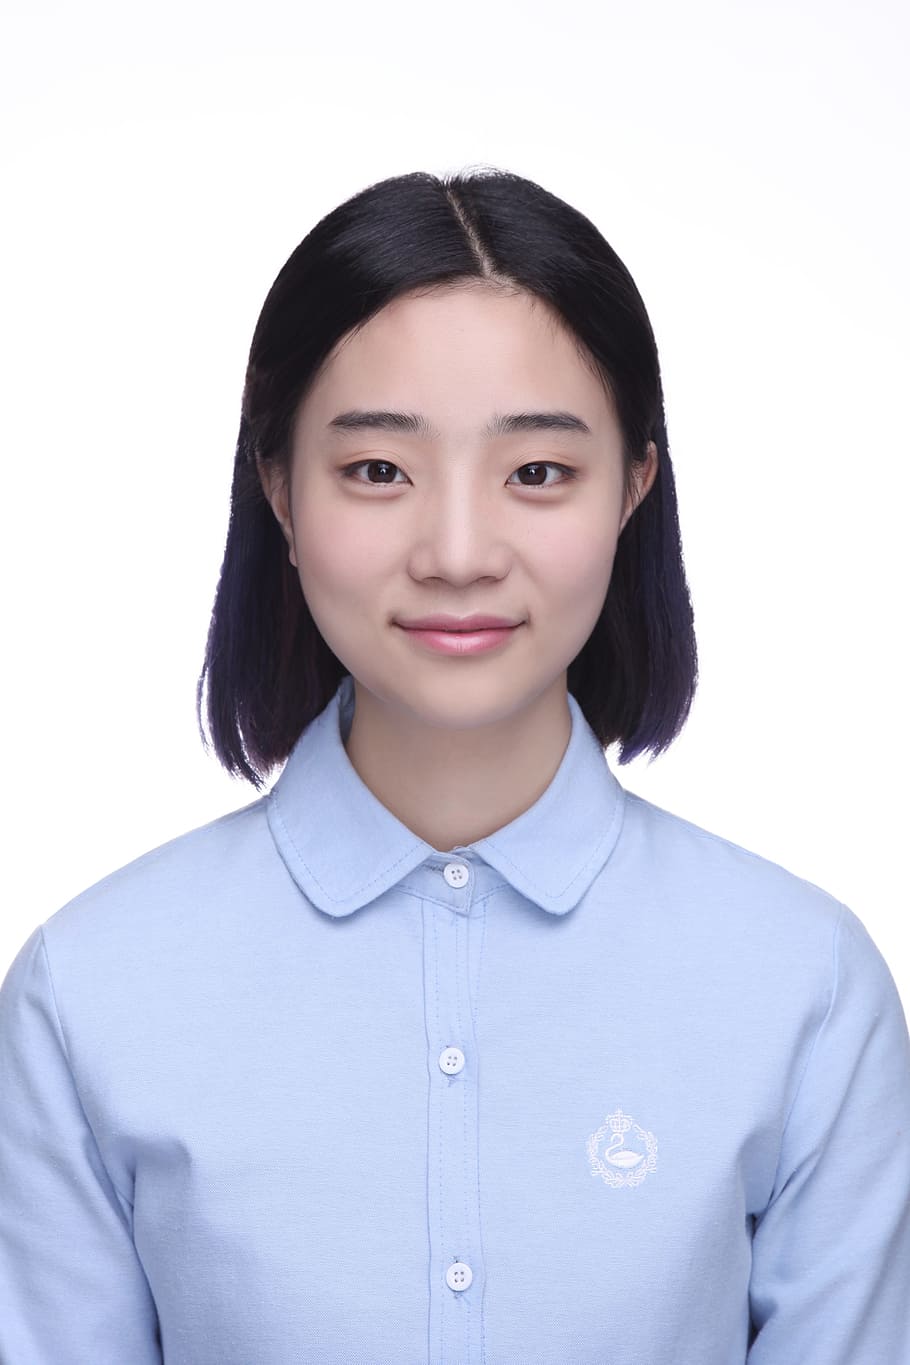 id photo, short hair, portrait, studio shot, white background, front view, looking at camera, one person, indoors, headshot